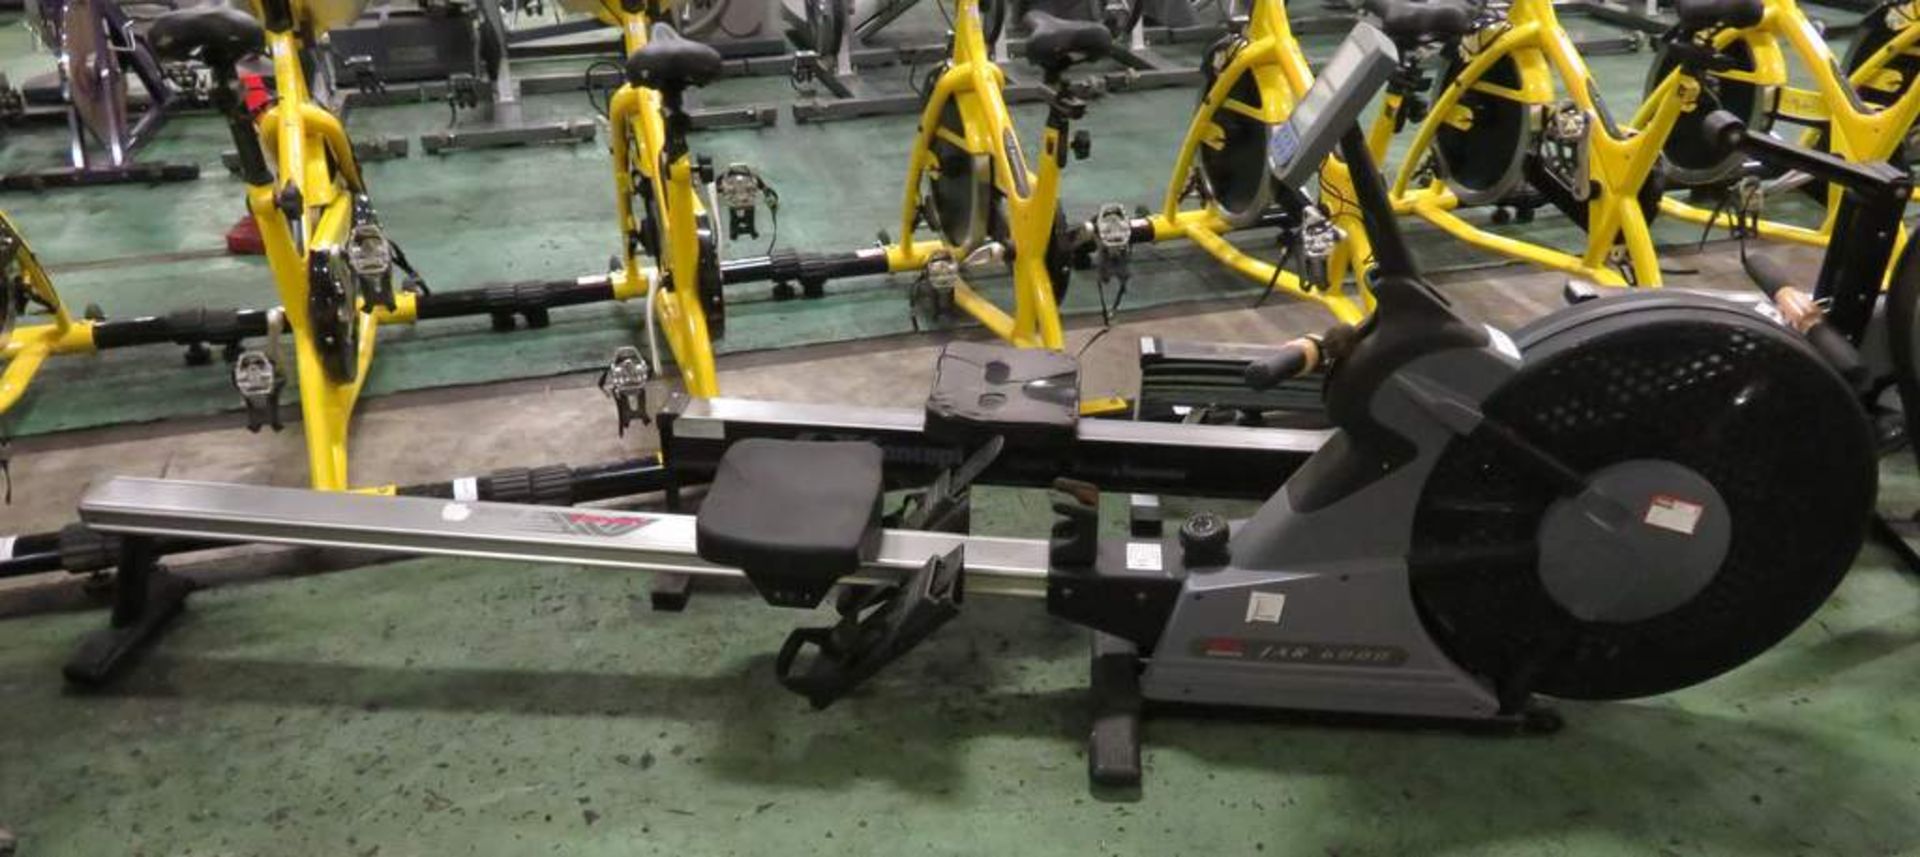 Johnson JAR 6000 Rowing Machine, Complete With Digital Display Console.